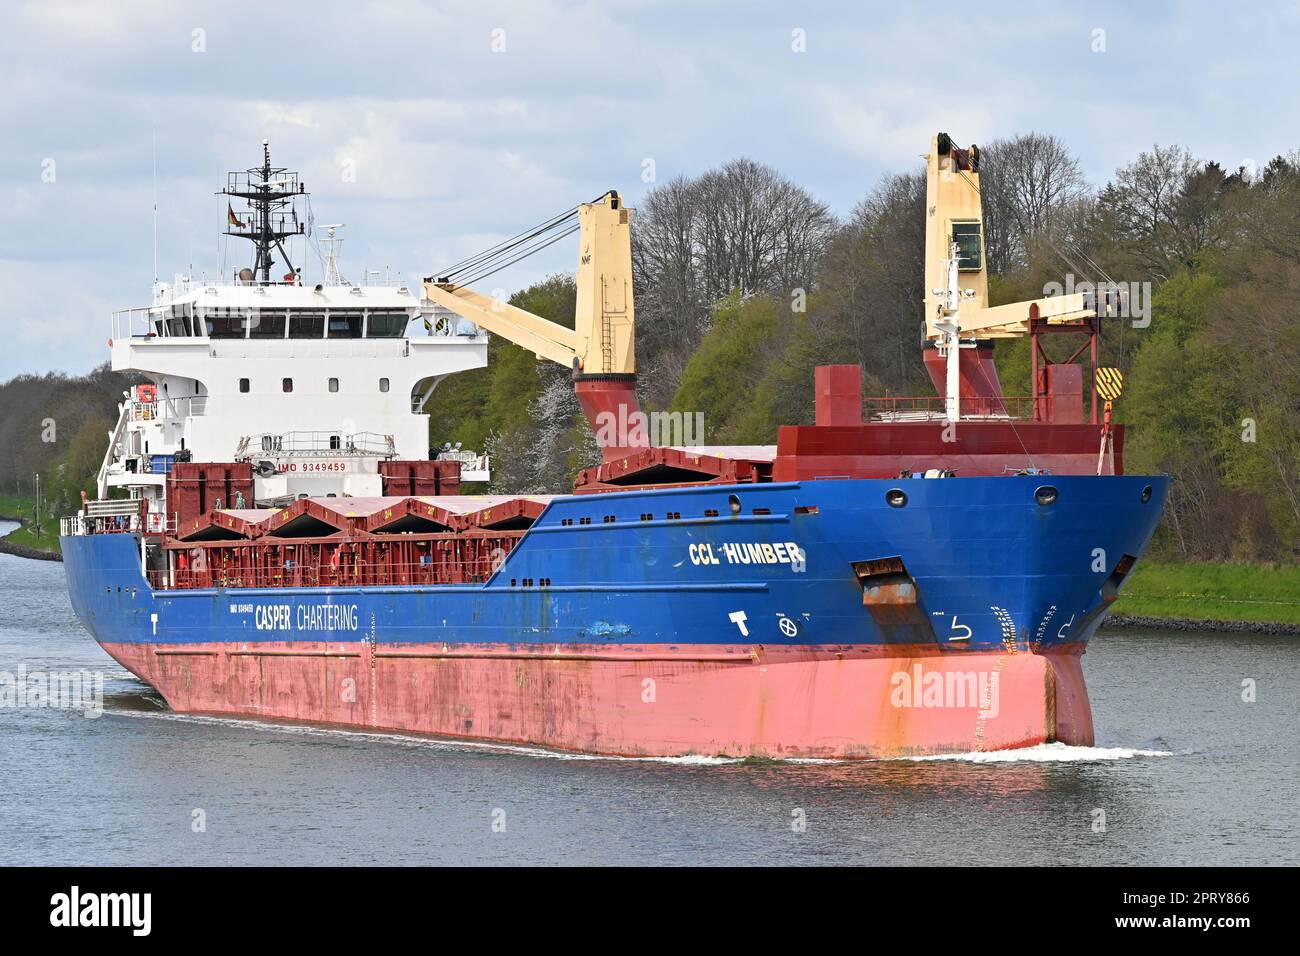 General Cargo Ship CCL HUMBER passing the Kiel Canal Stock Photo